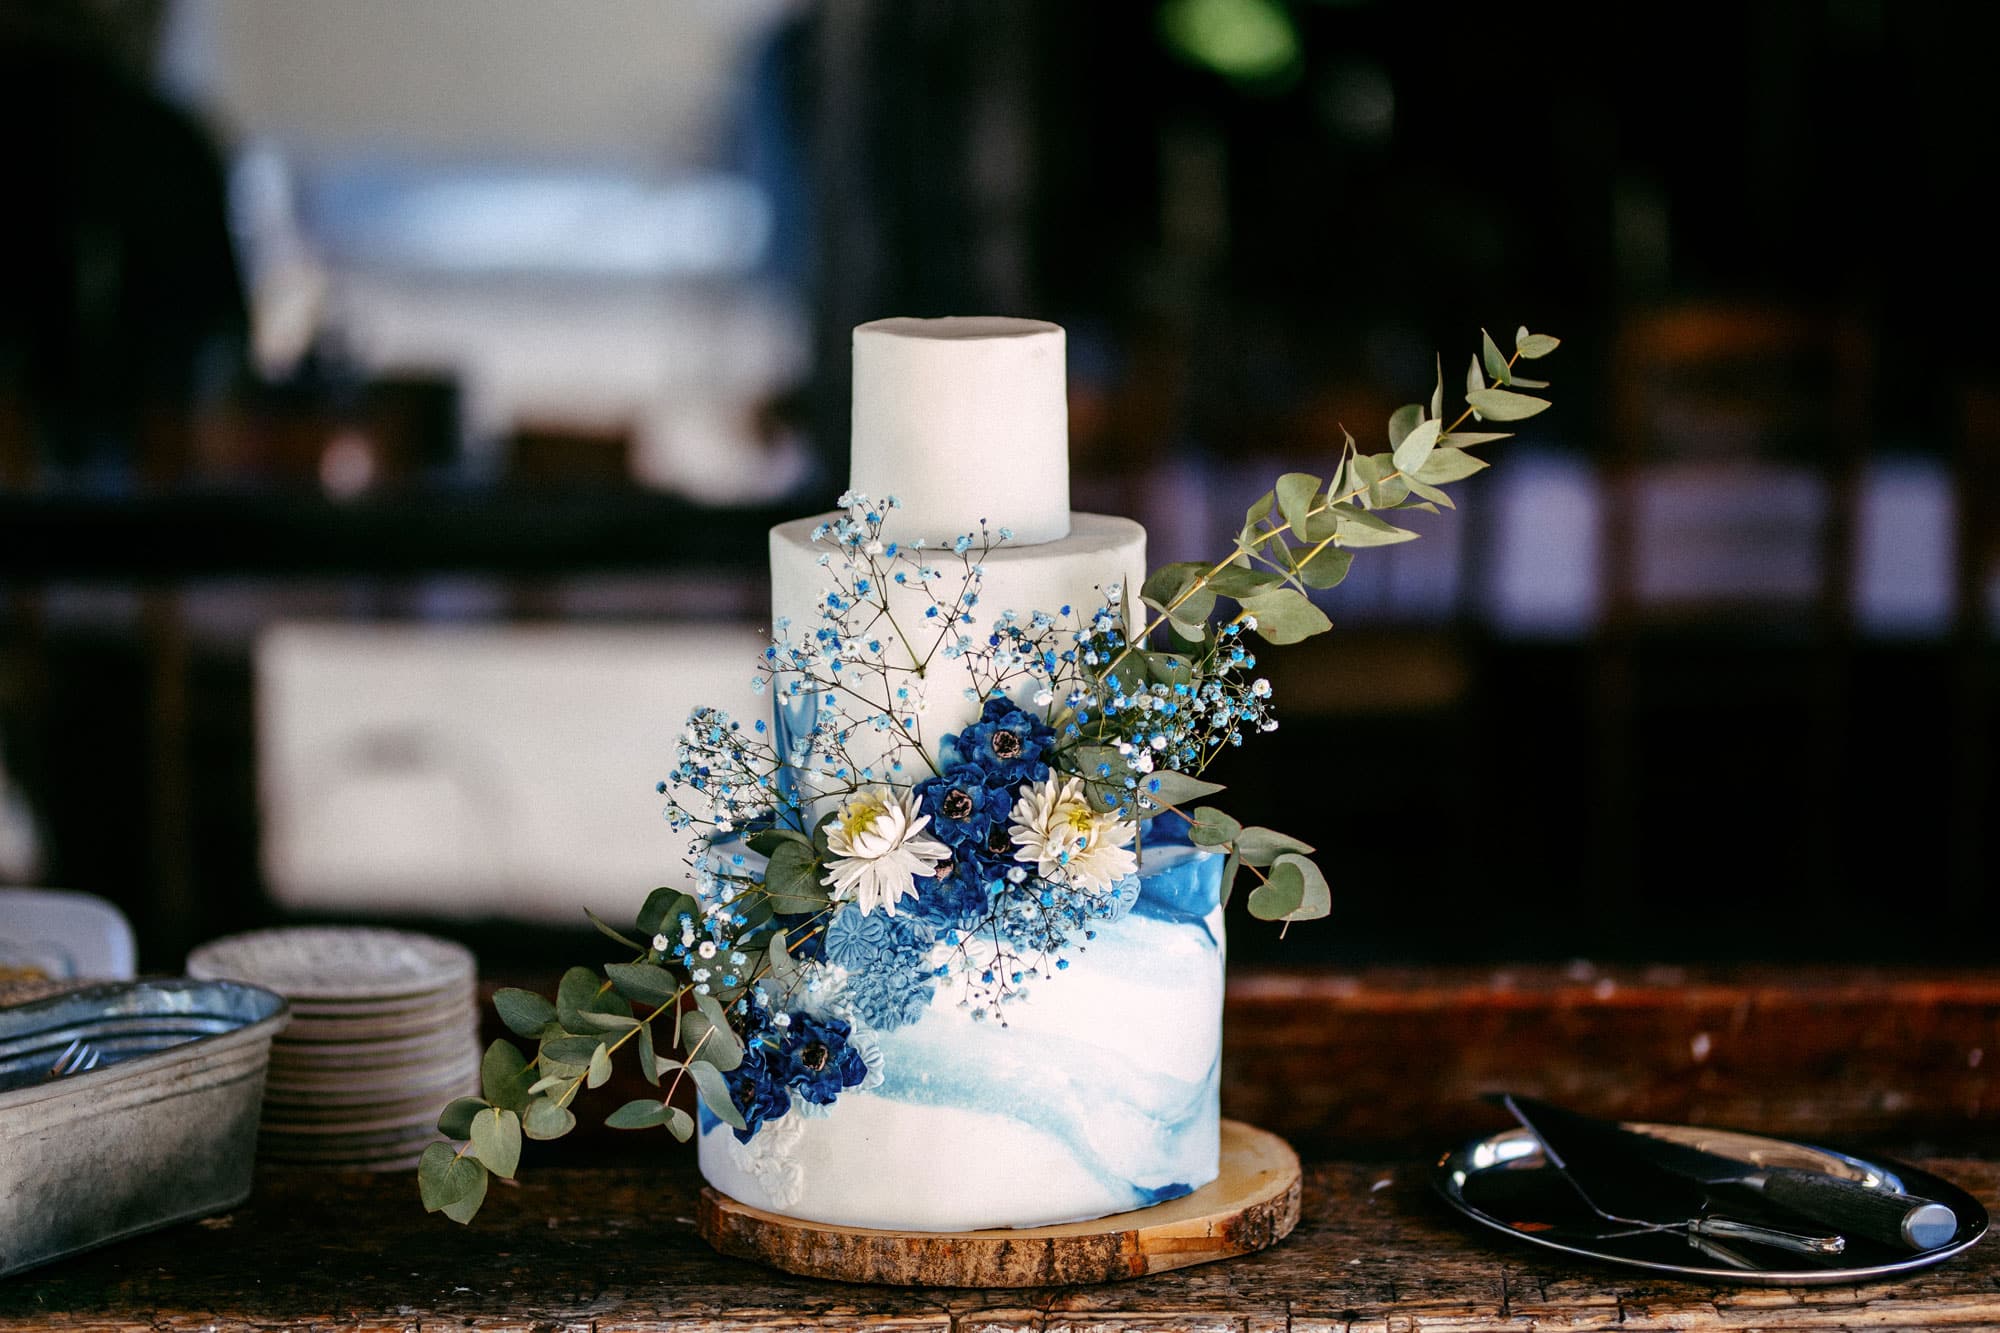 A wedding cake of blue and white stands on a wooden table.